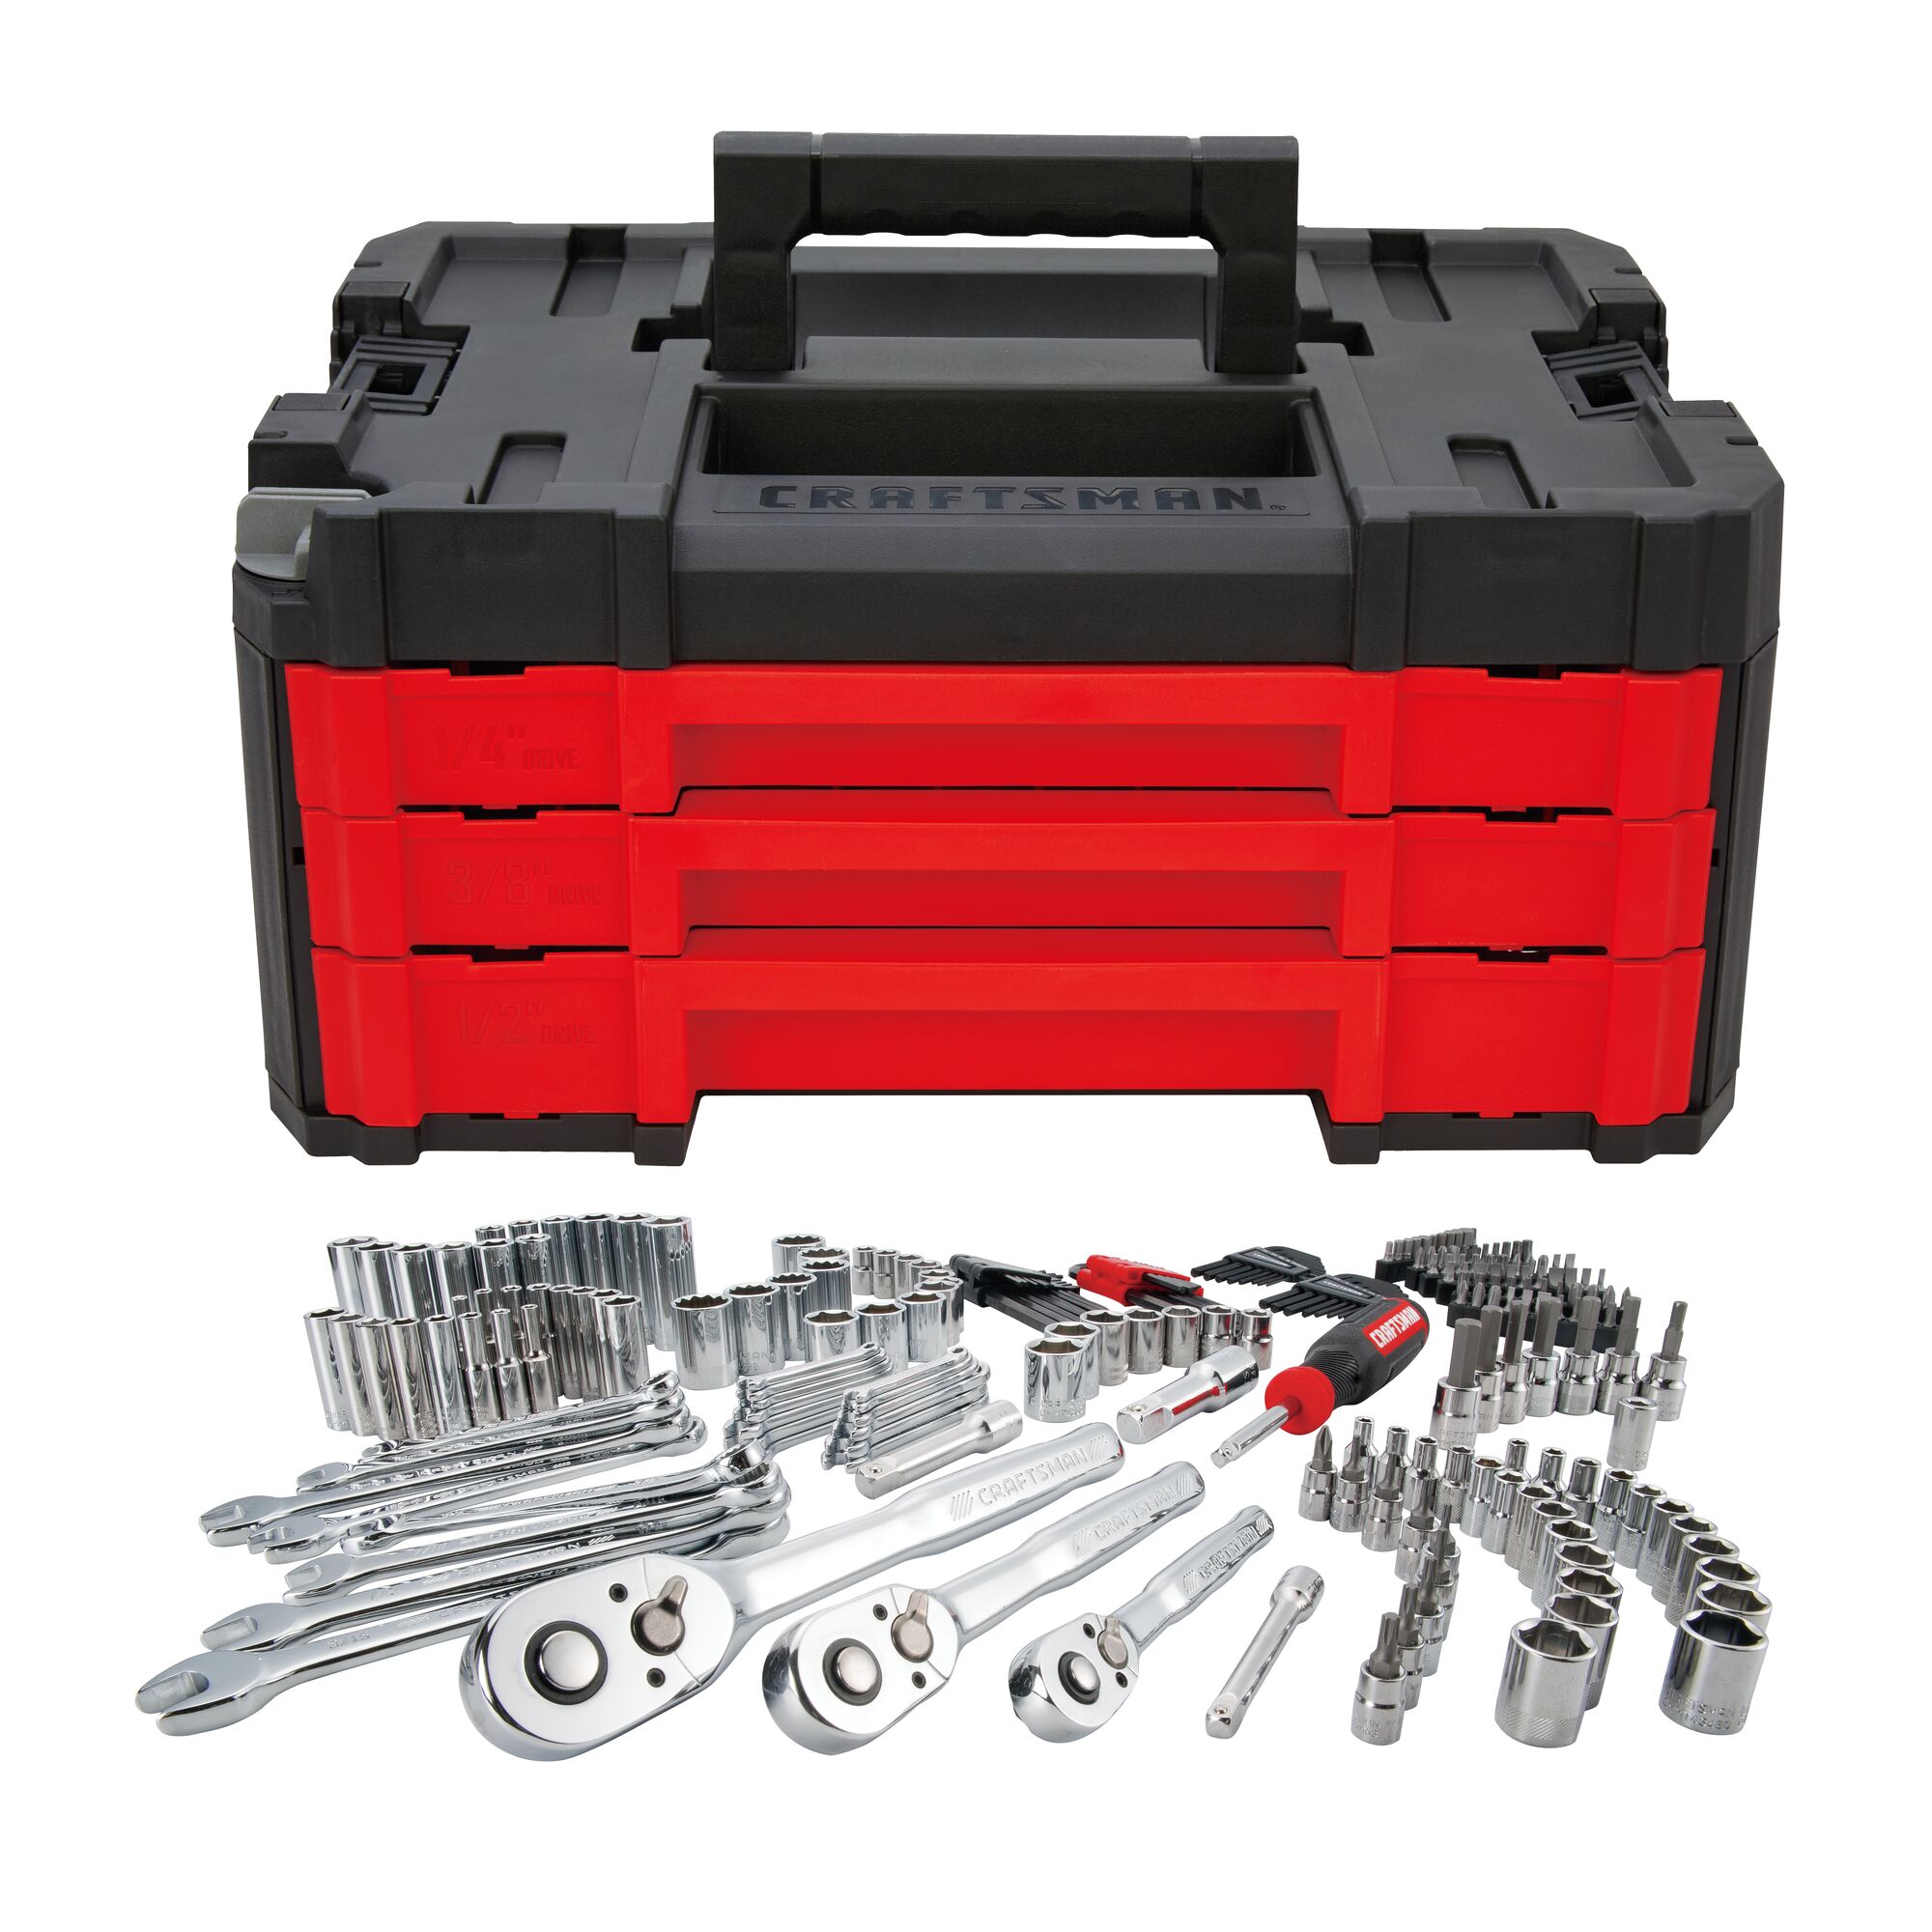 View of CRAFTSMAN Mechanics Tool Set and additional tools in the kit